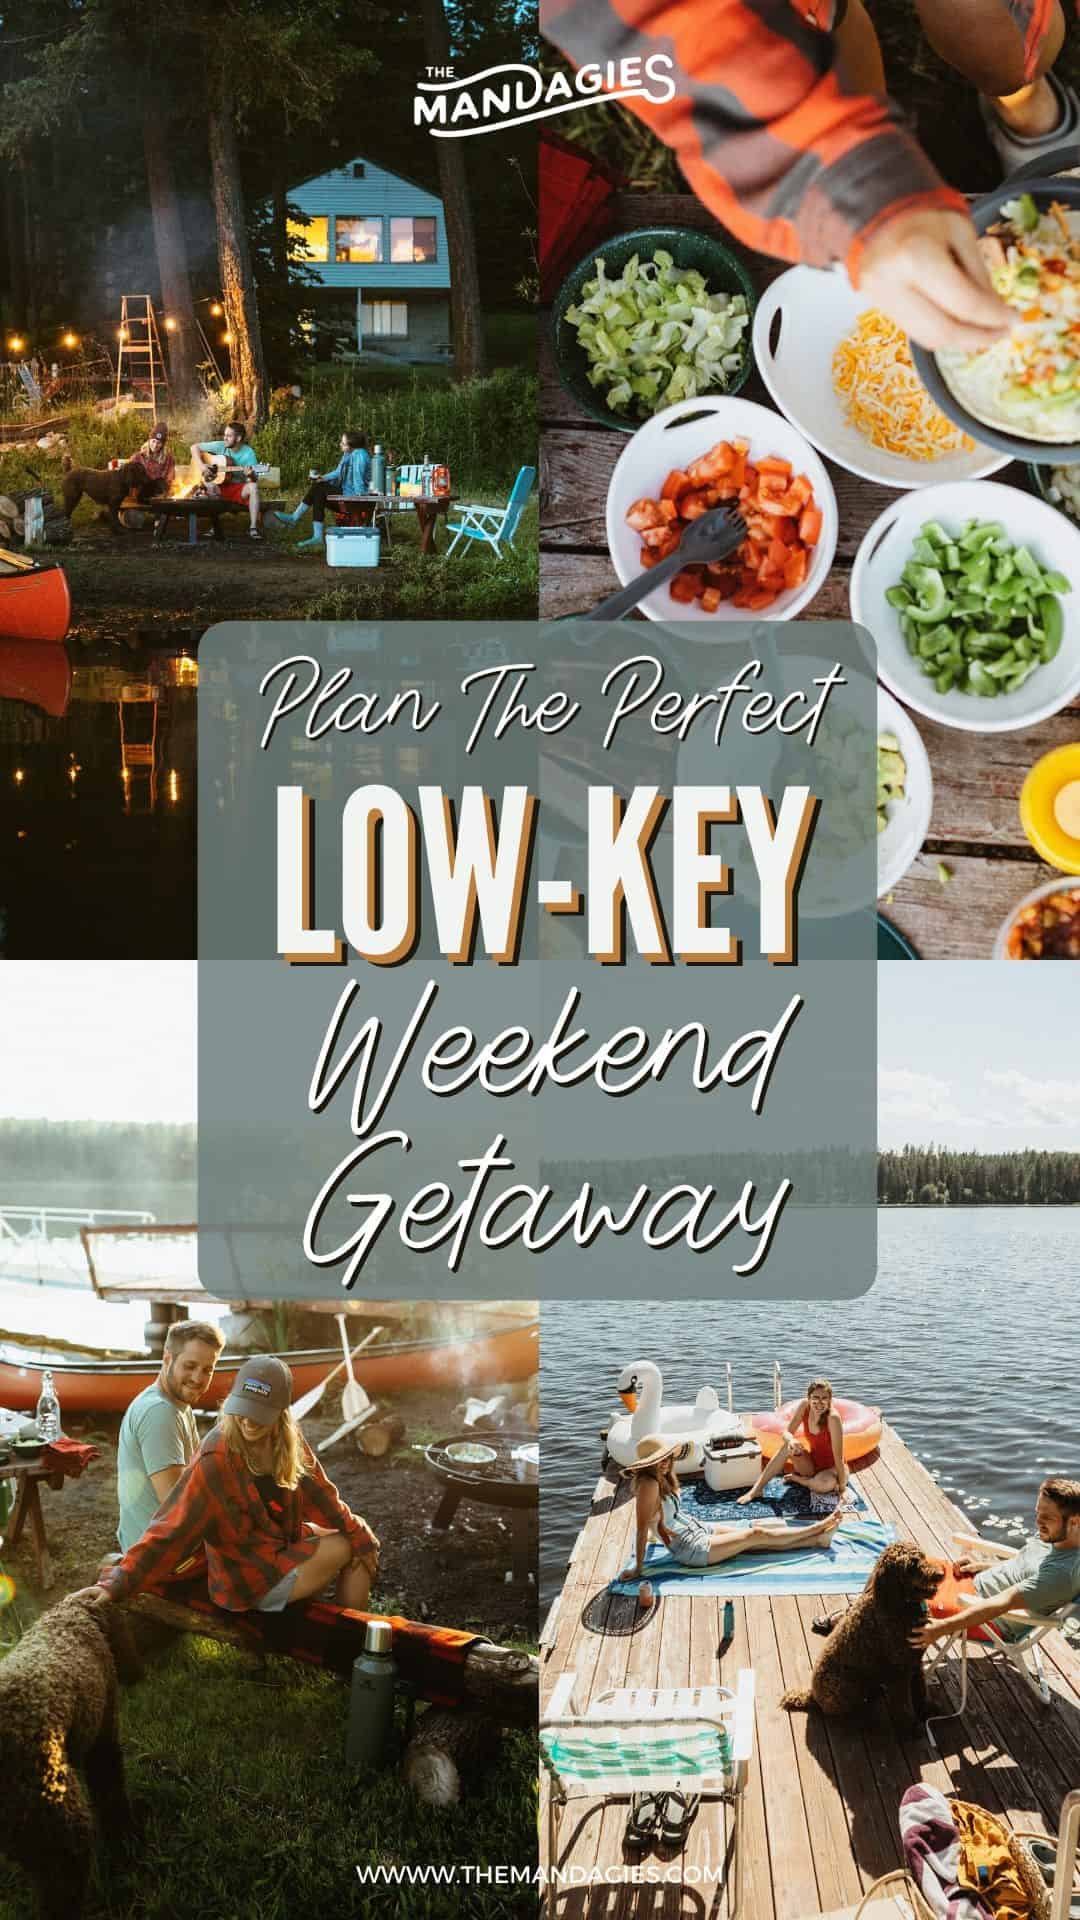 Want to plan a weekend getaway but don't want to travel far? We've got you covered! In this post, we're sharing how to plan the perfect low-key, laid back weekend getaway close to home, and sharing all the gear and activities for some fun summer memories. Save this for your next local trip inspiration! #laidback #weekendgetaway #localtravel #travel #summer #lake #canoe #fire #campfire #tacos #coffee #stanleybrand #stanleyPMI